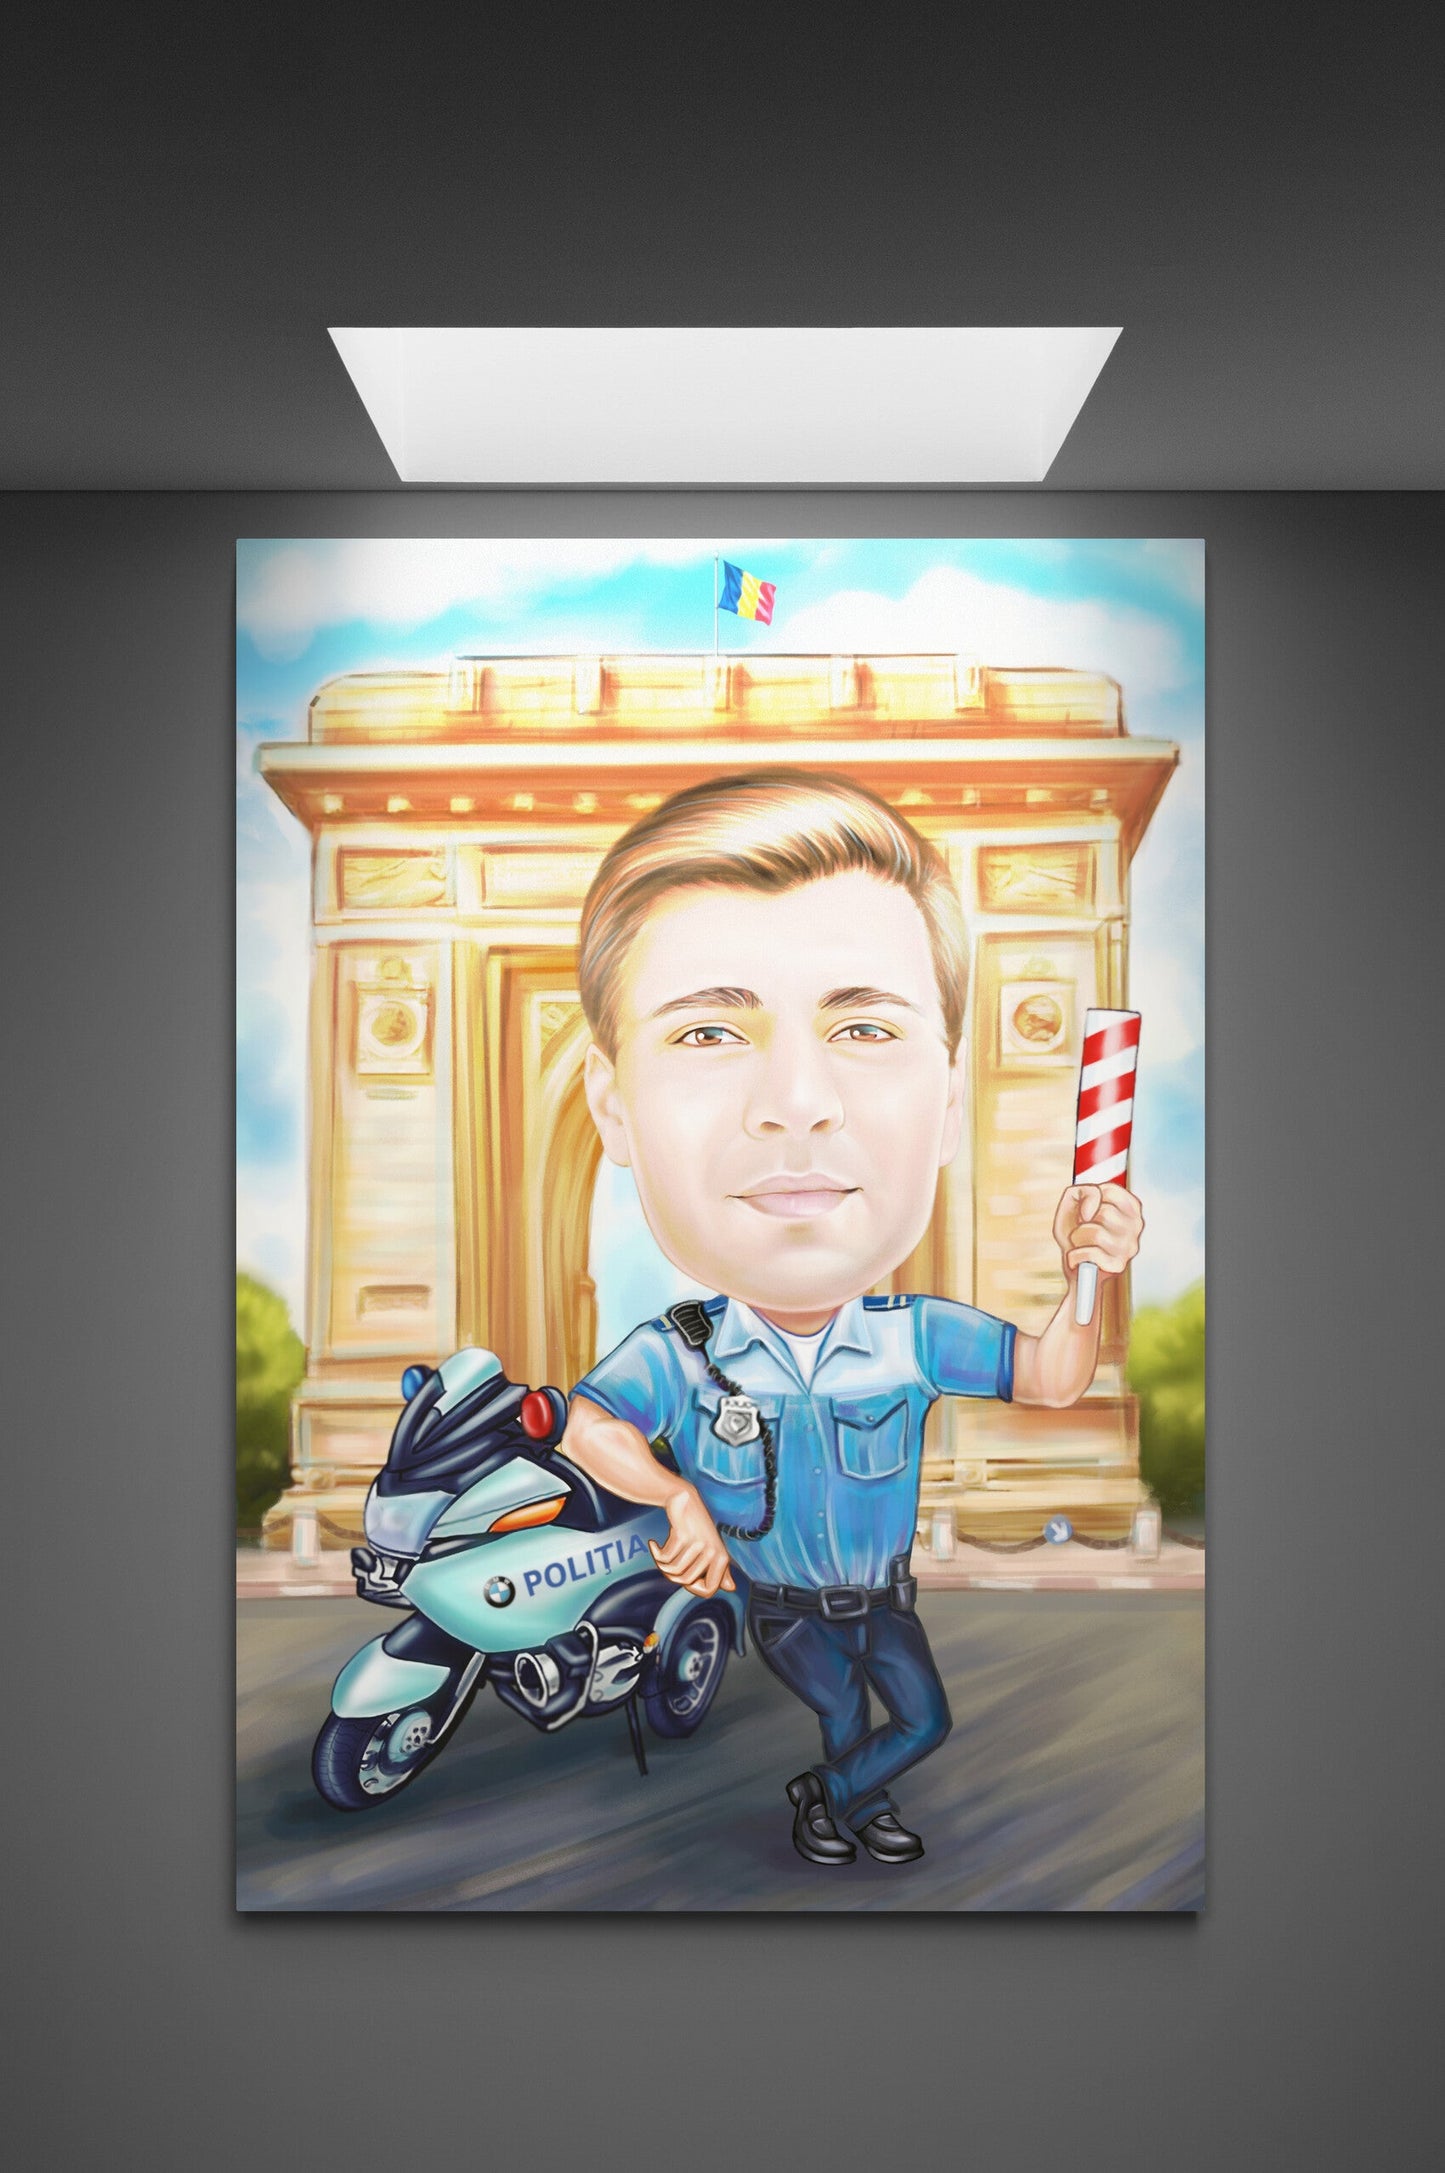 Policeman with motorcycle caricature